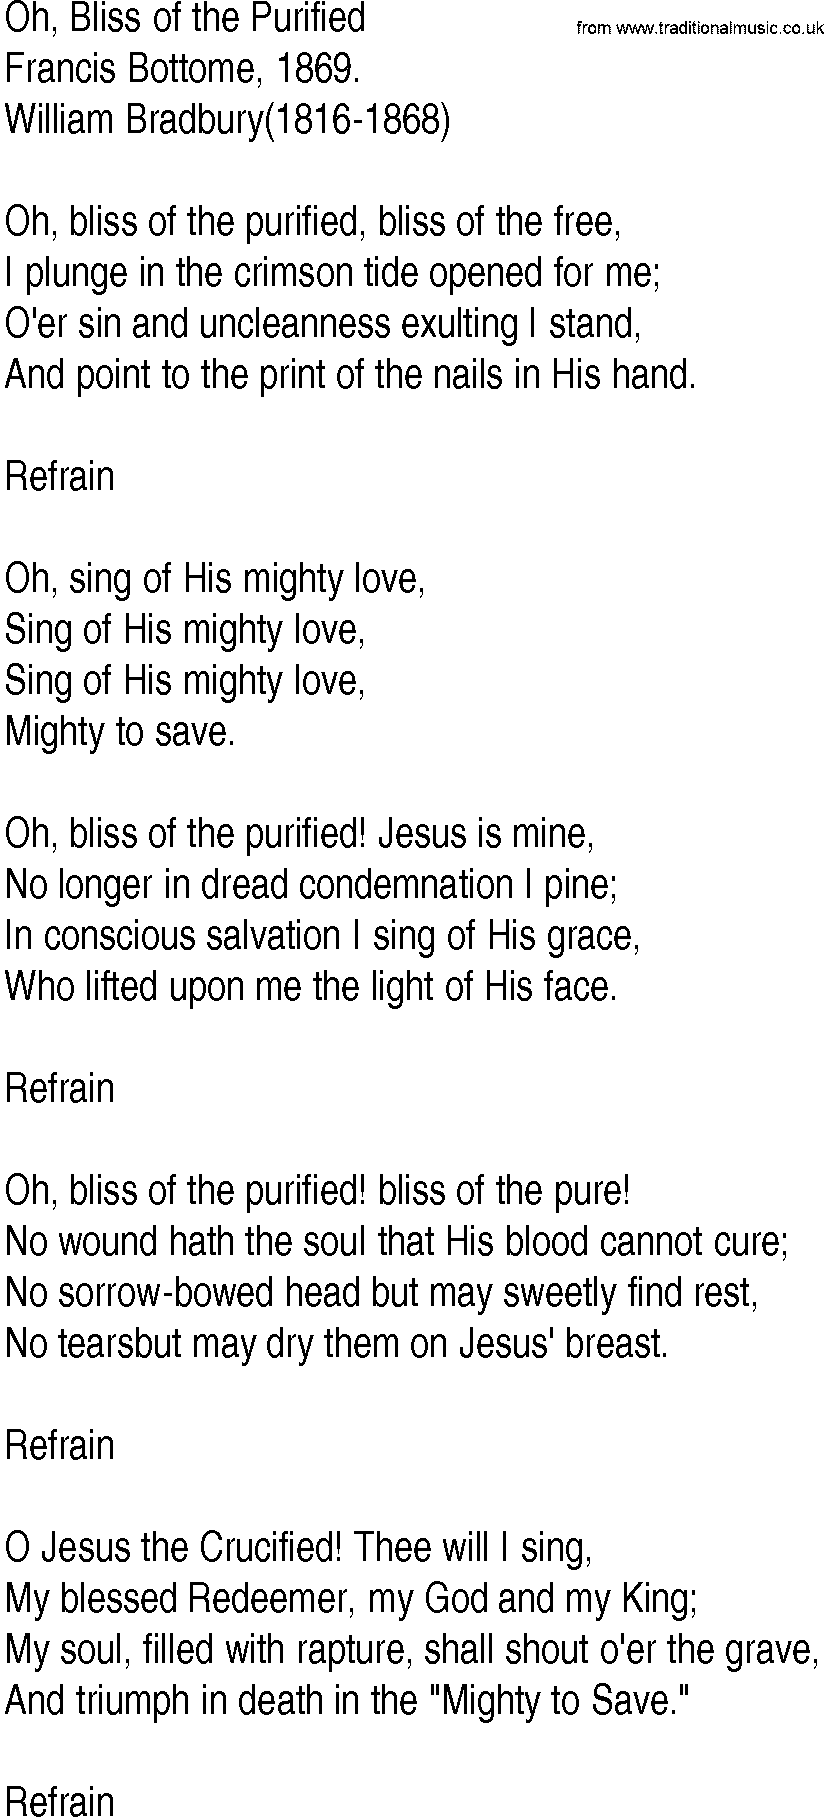 Hymn and Gospel Song: Oh, Bliss of the Purified by Francis Bottome lyrics